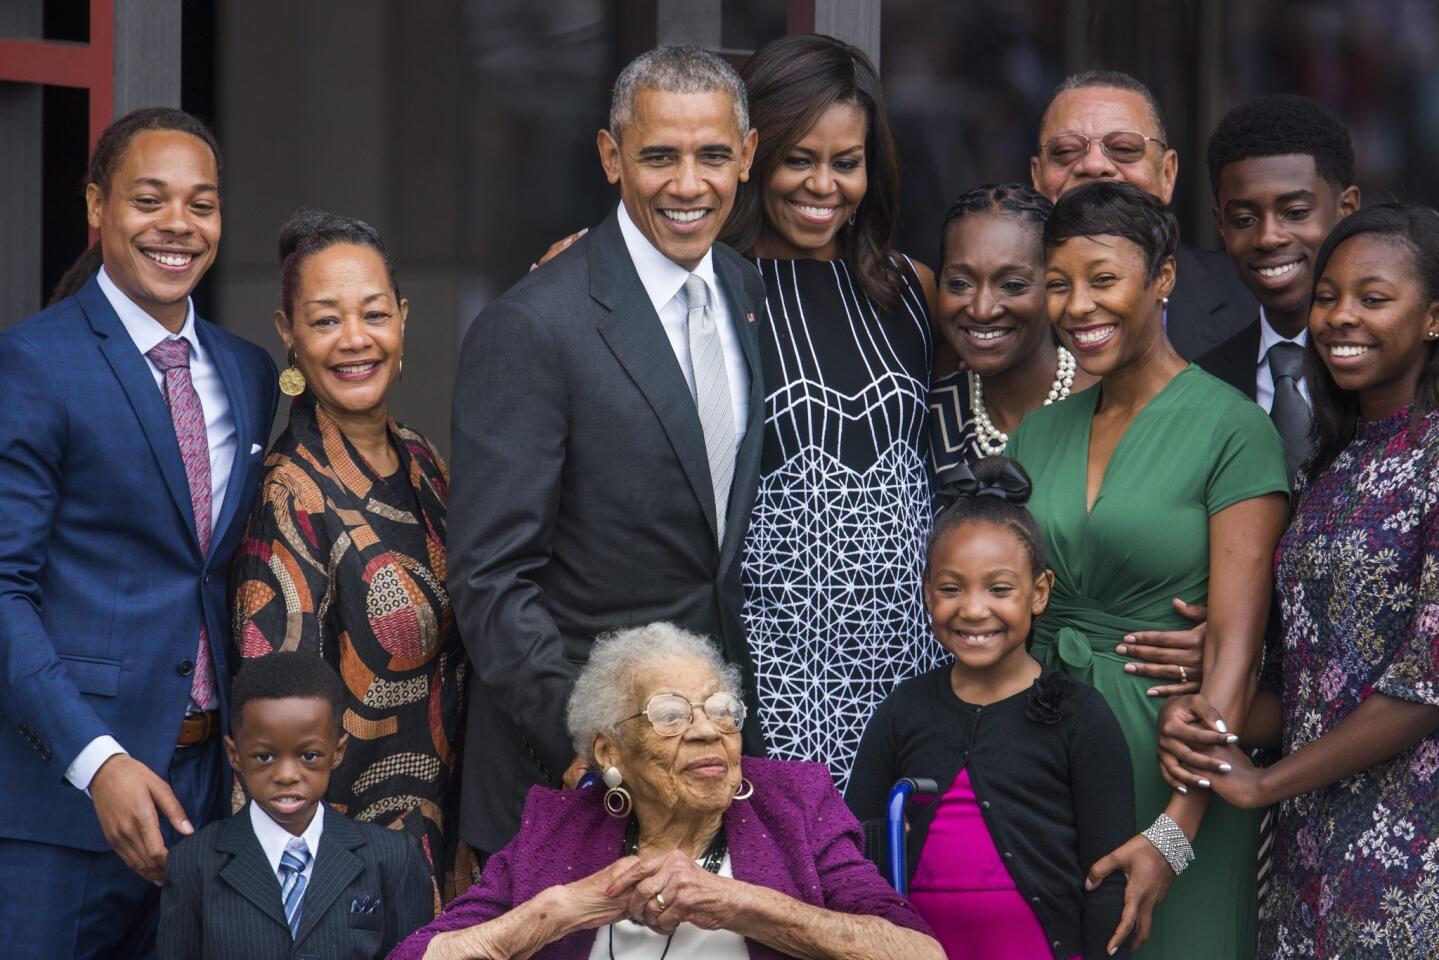 President Obama and First Lady Michelle Obama pose with four generations of the Bonner family, who are descendants of slaves, after ringing the First Baptist Church Bell to officially open the Smithsonian's National Museum of African American History and Culture in Washington, D.C.